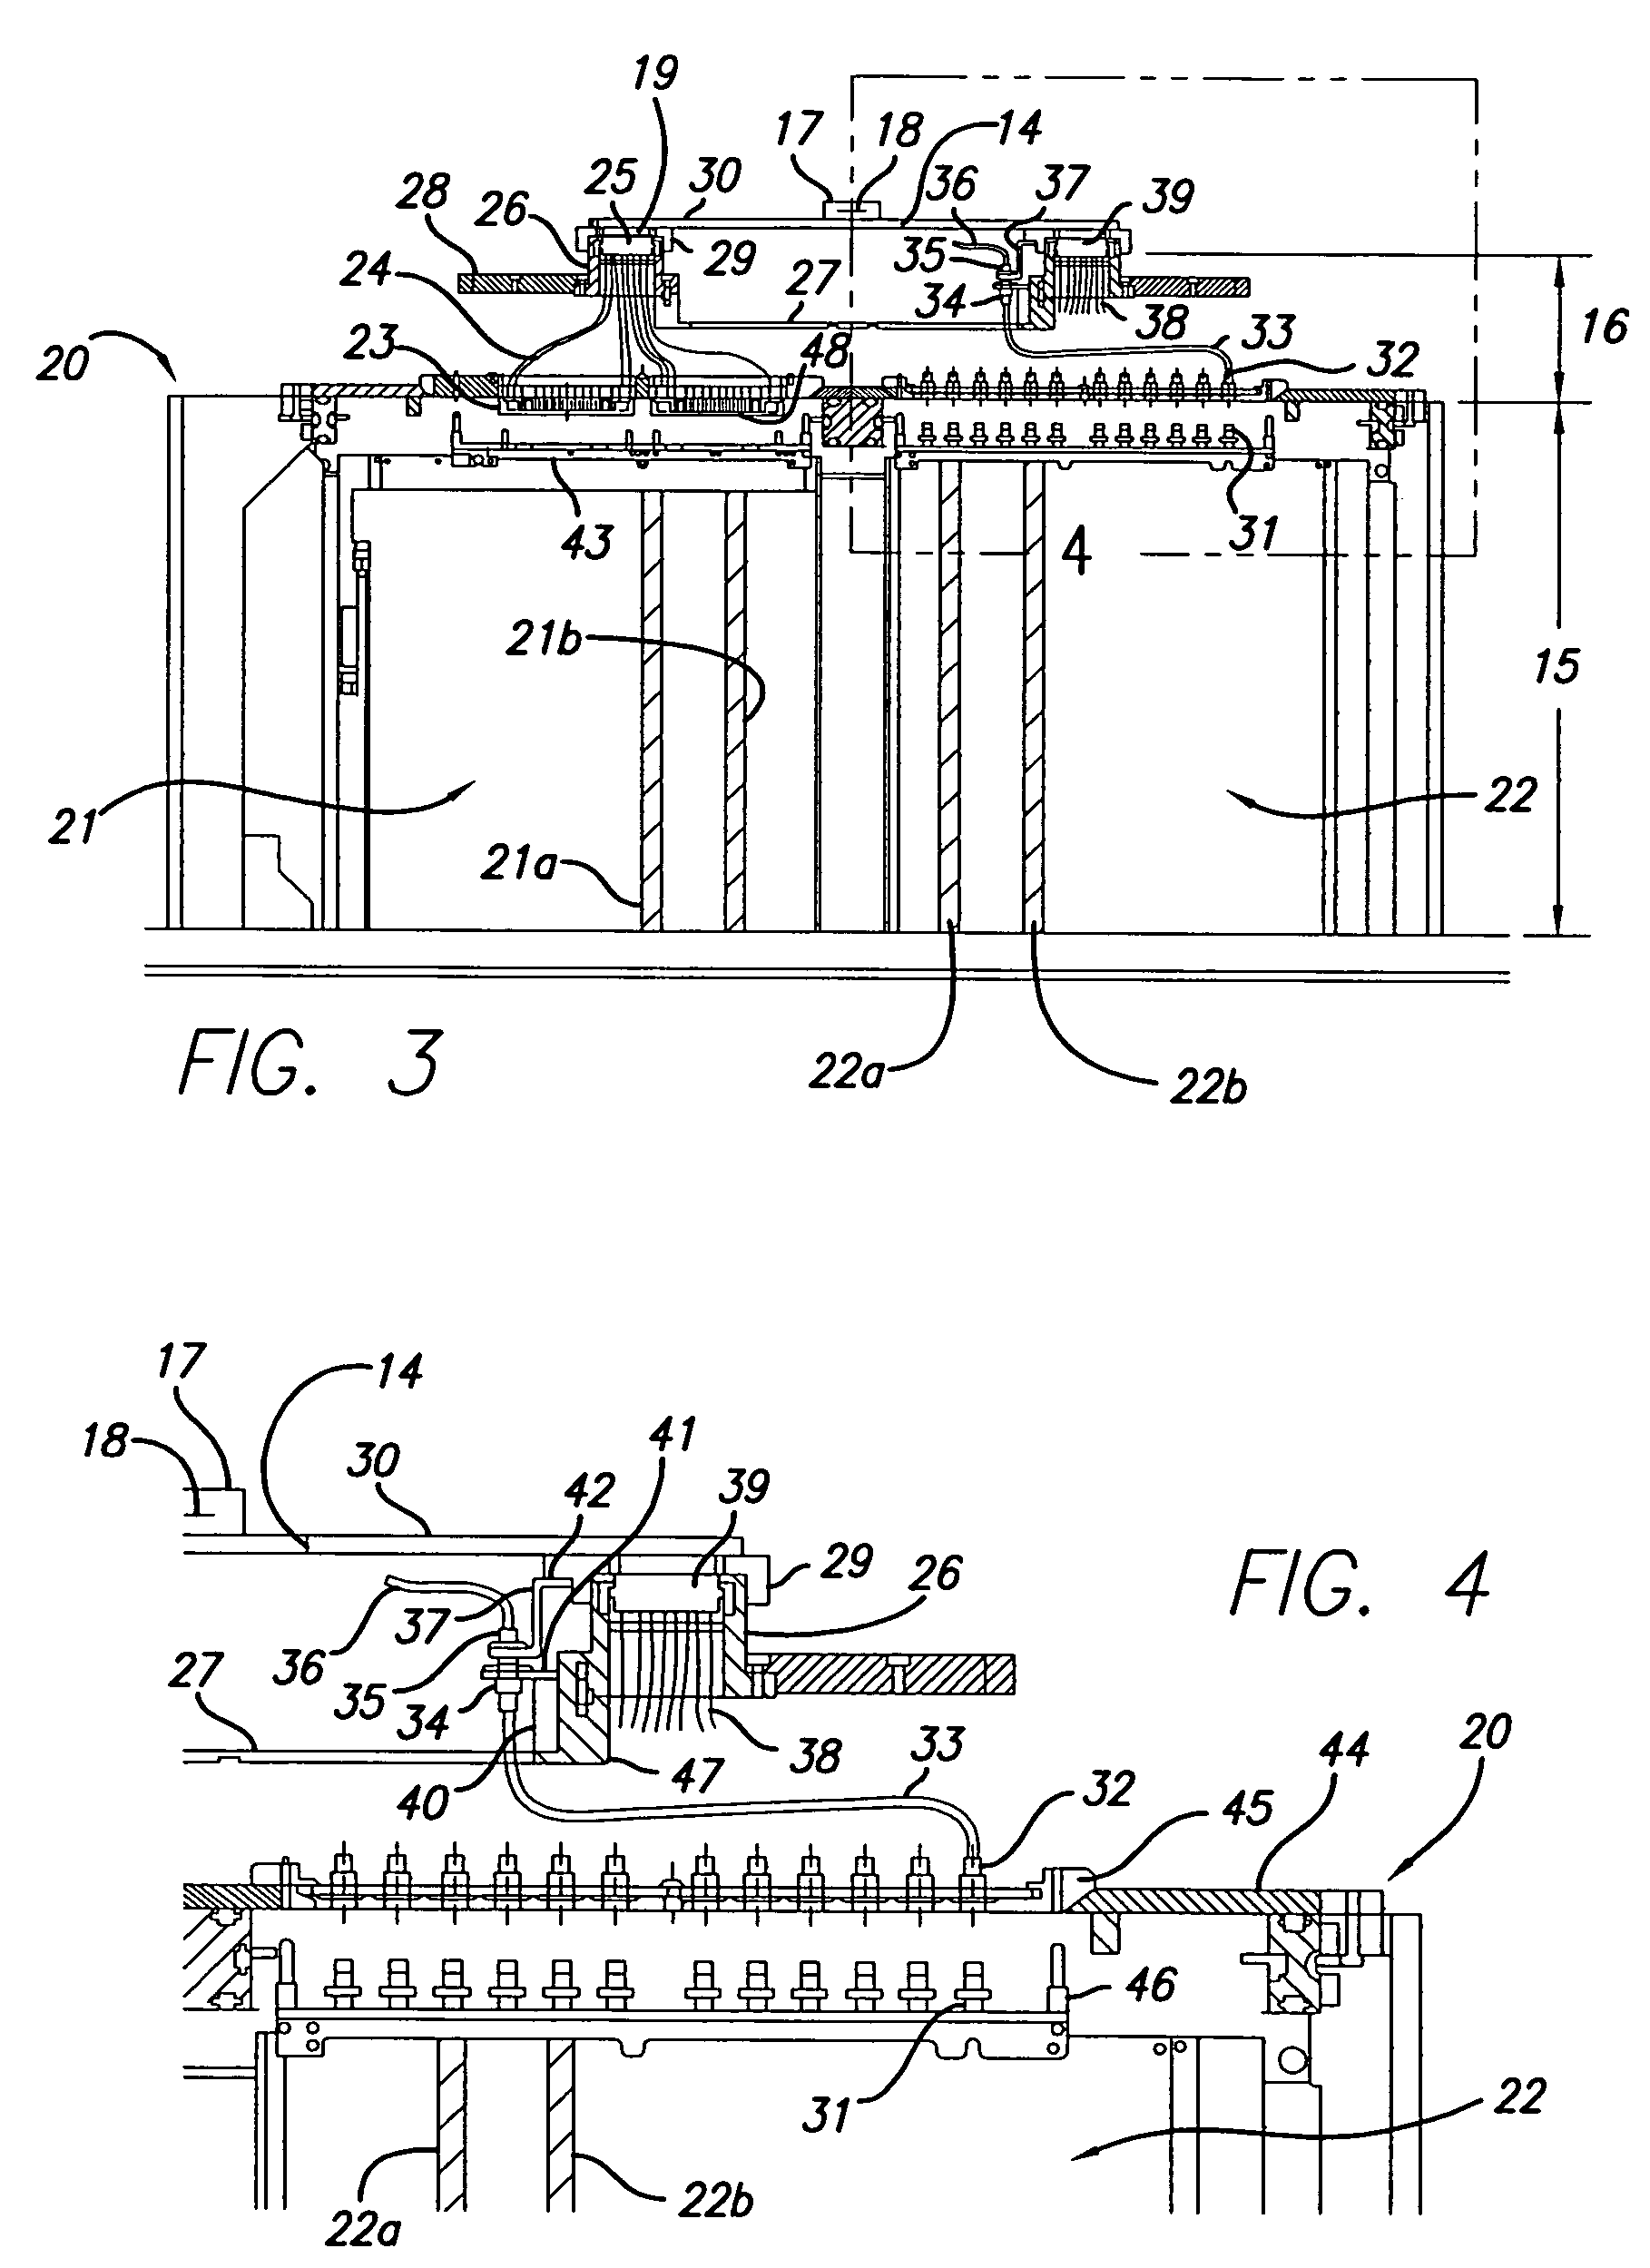 Apparatus for testing a device with a high frequency signal